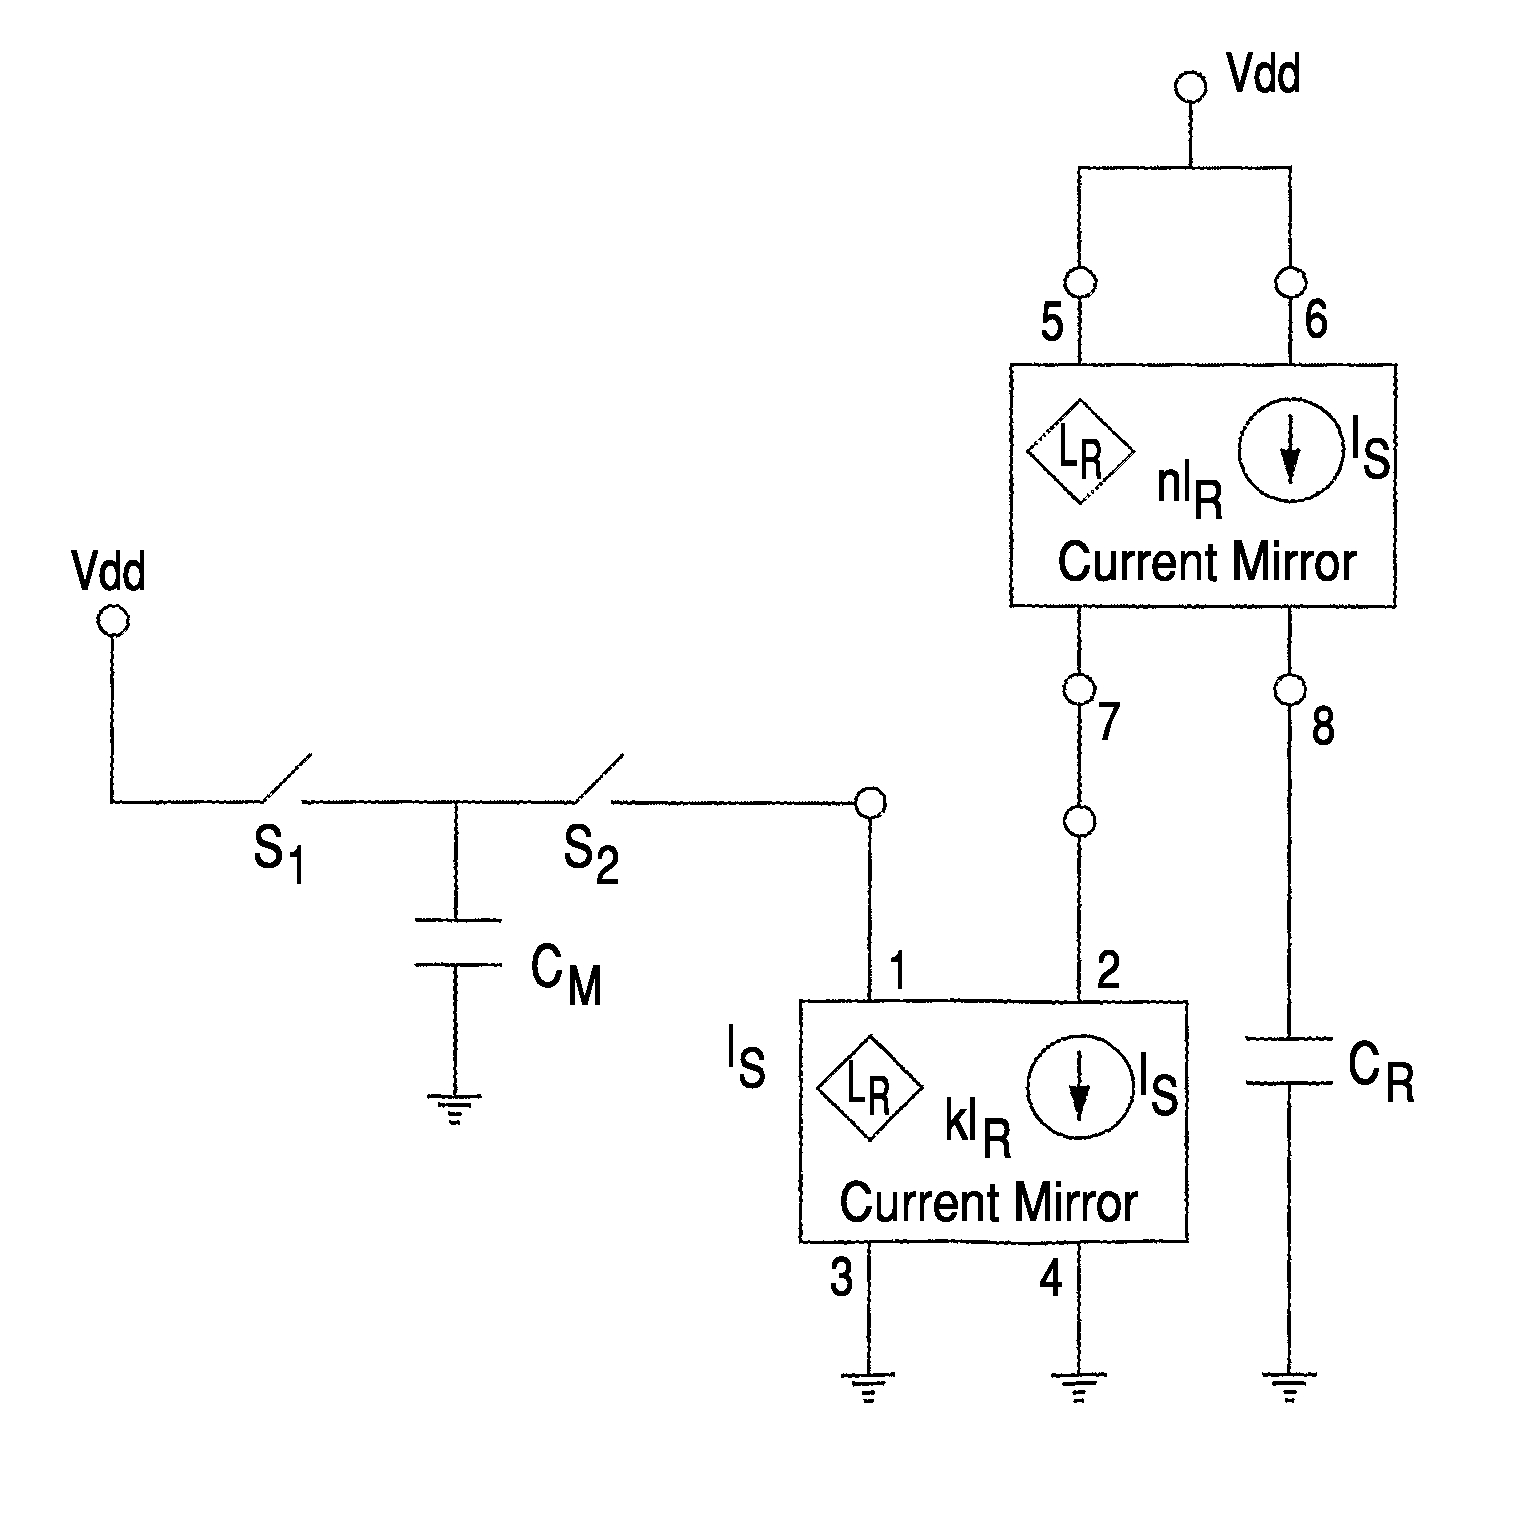 Parasitic capacitance cancellation in capacitive measurement applications